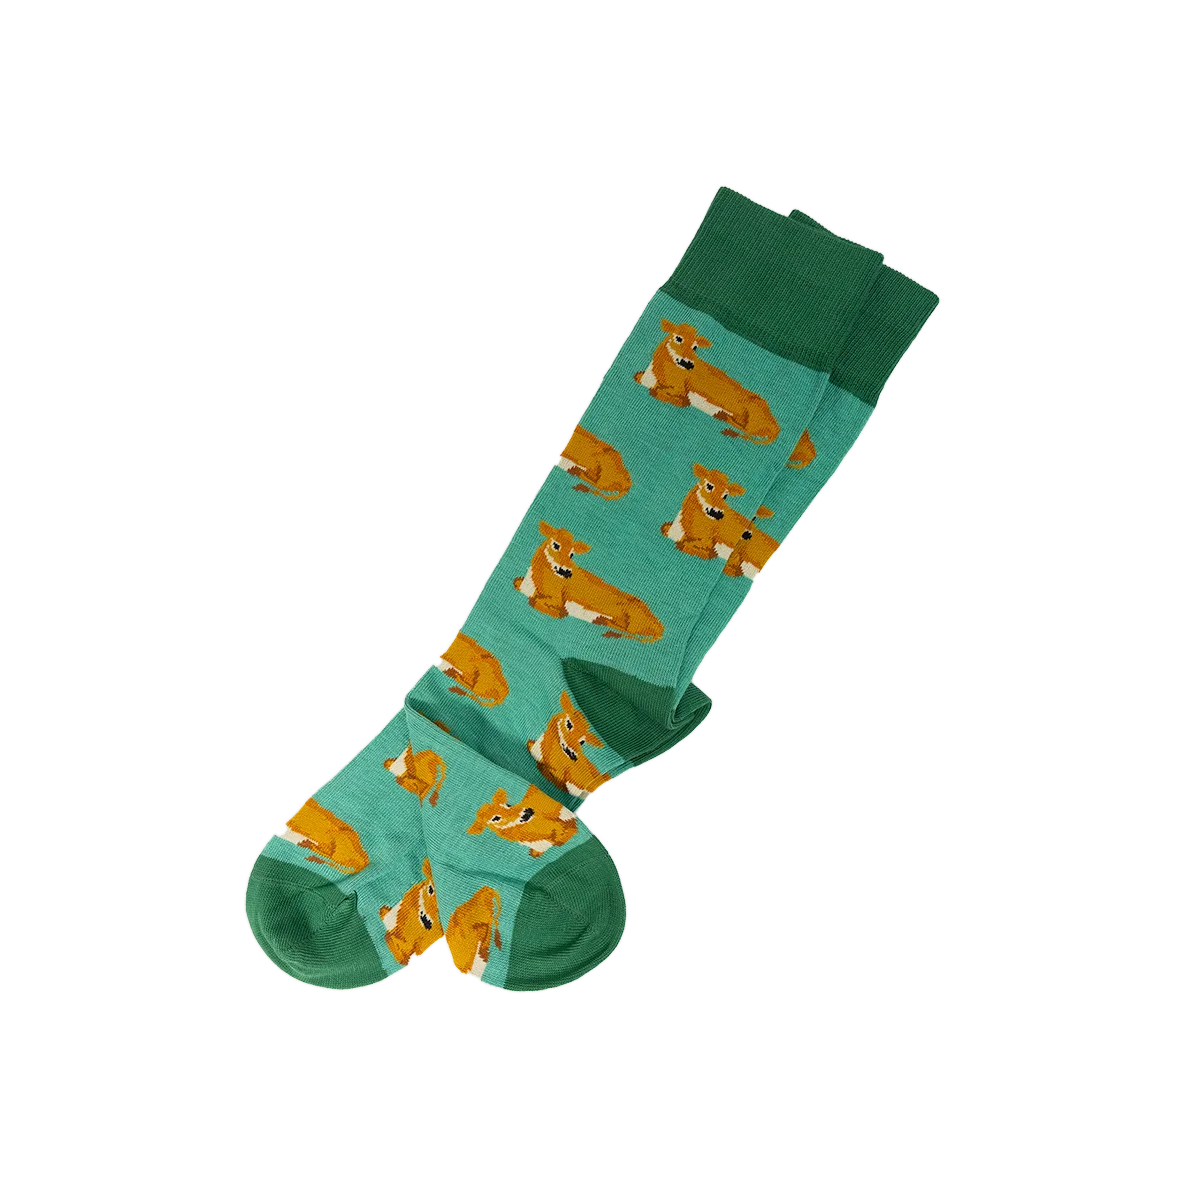 Jersey Cow Socks in Grass color